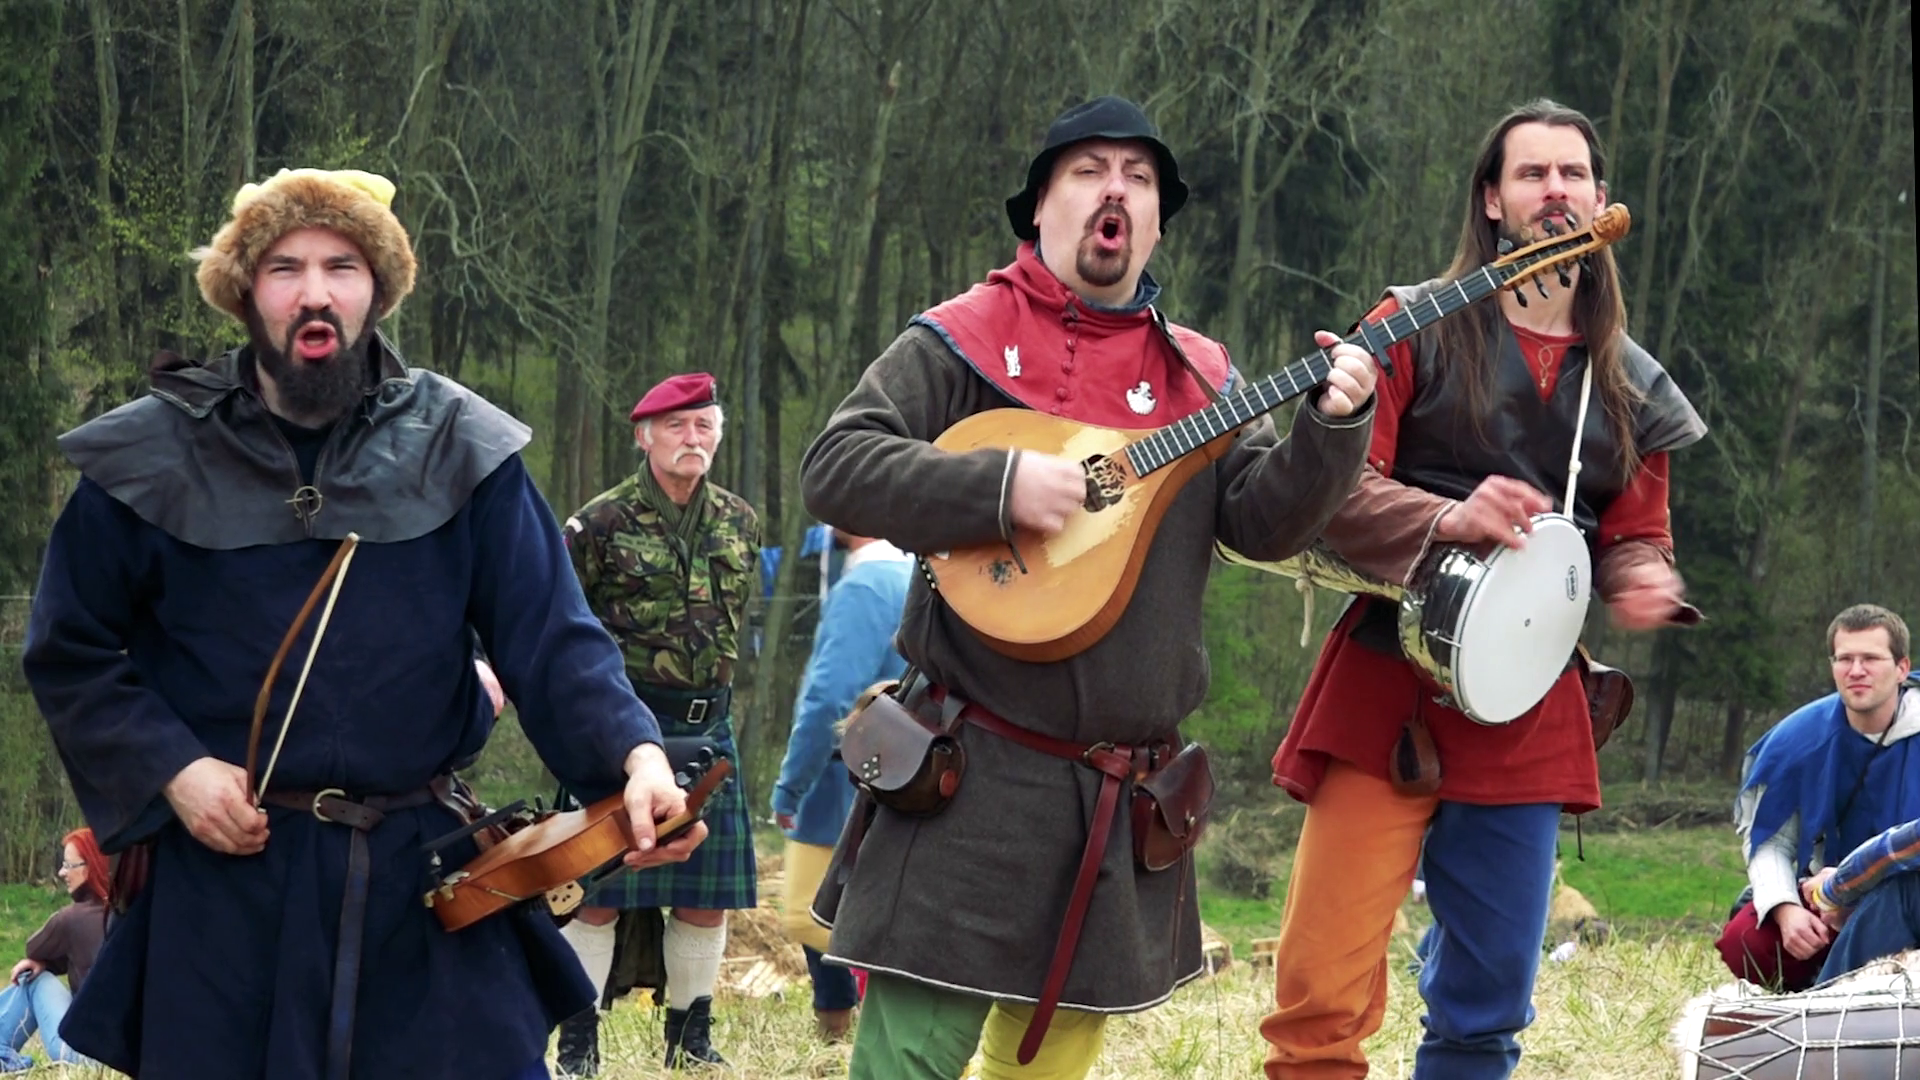 Three men in mediaeval costumes stand, sing and play on musical ...